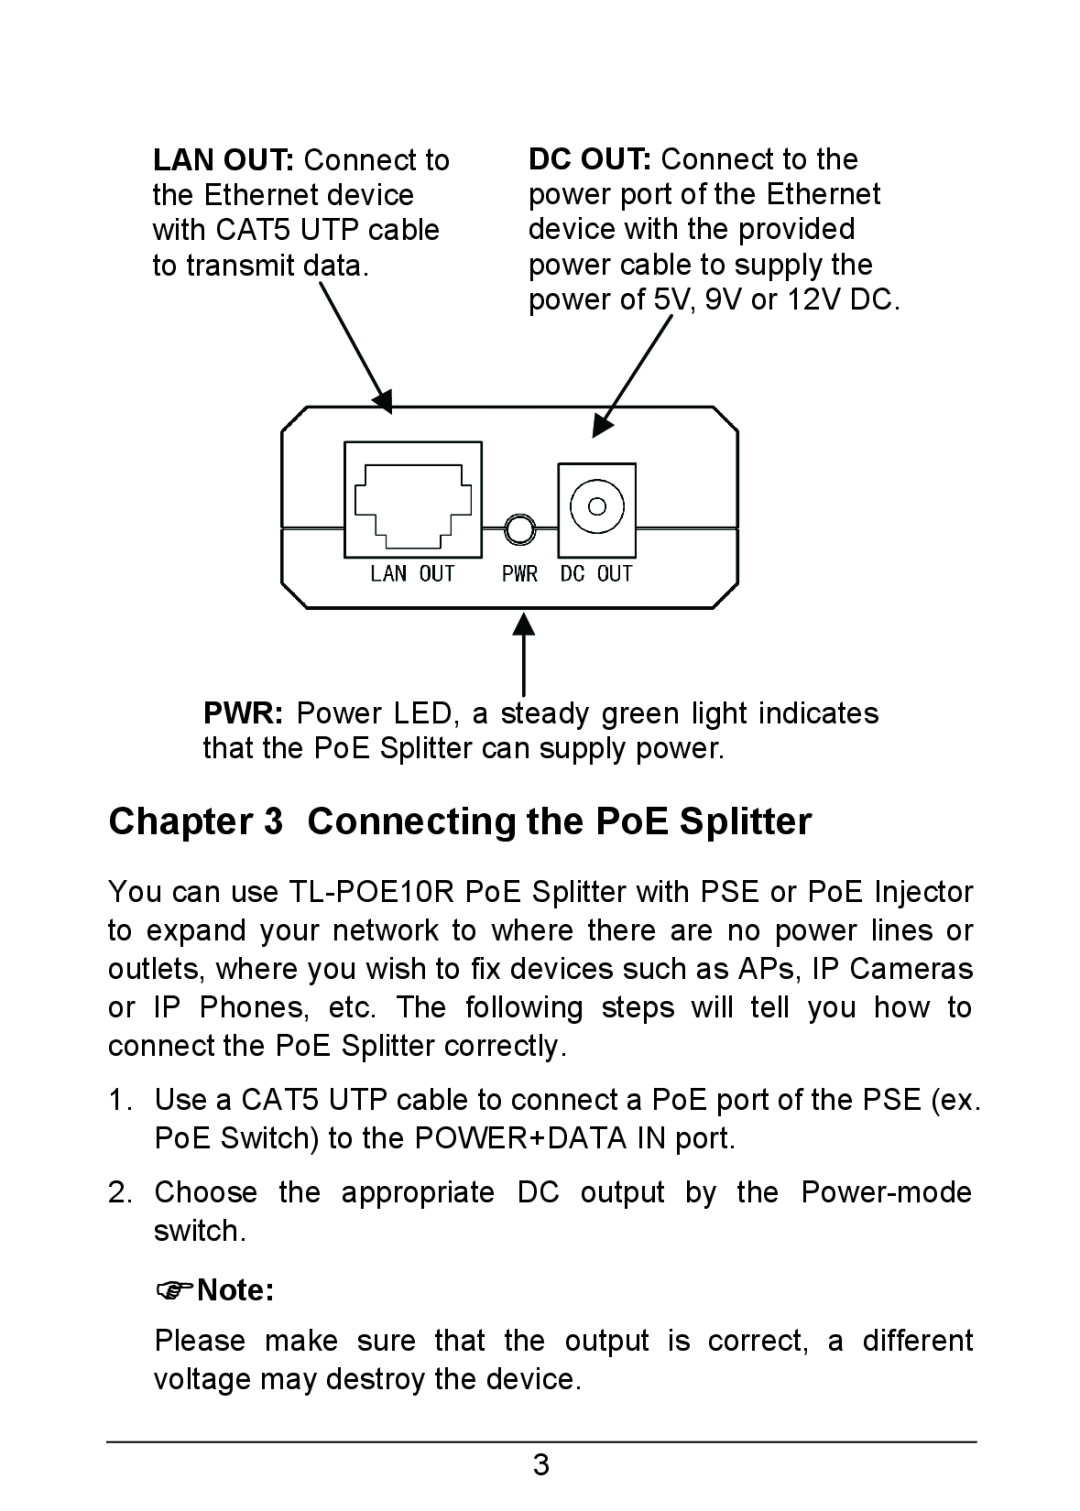 TP-Link TL-POE10R manual Connecting the PoE Splitter 